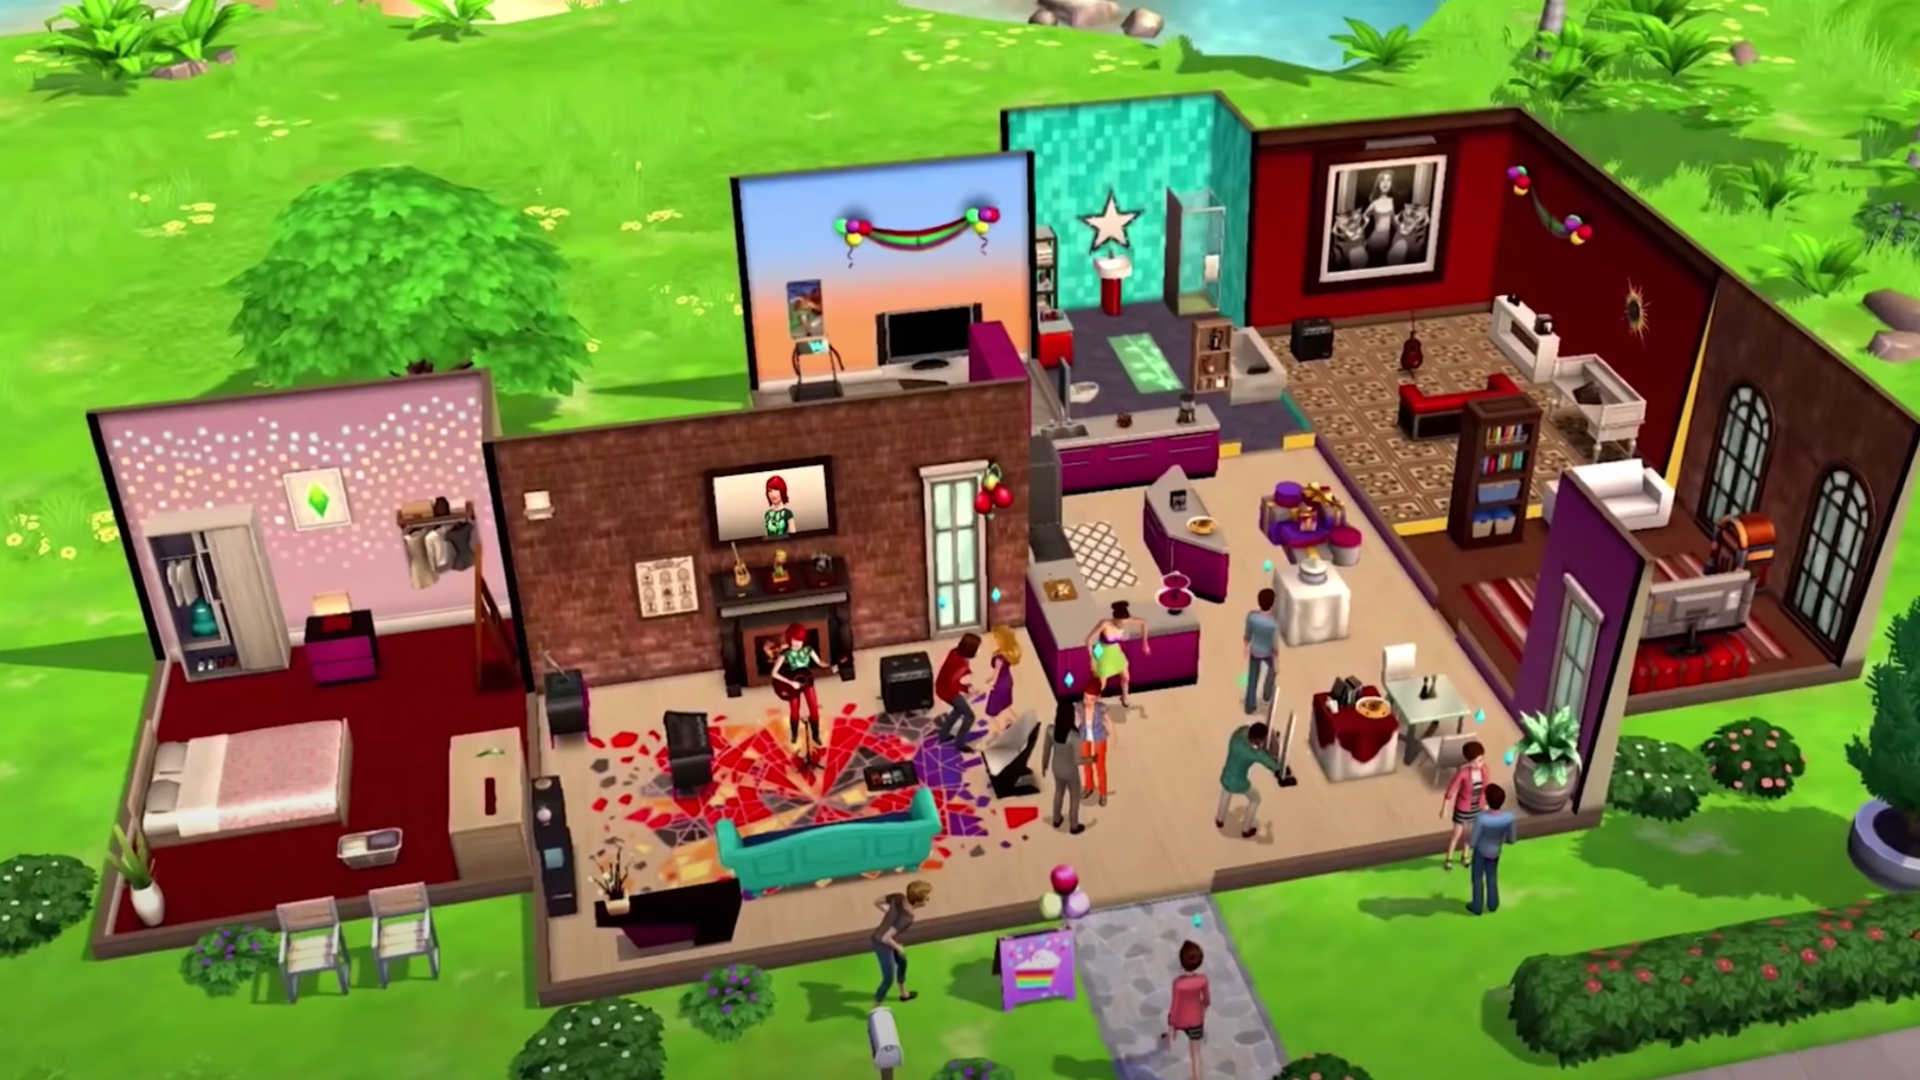 Sims characters having a party